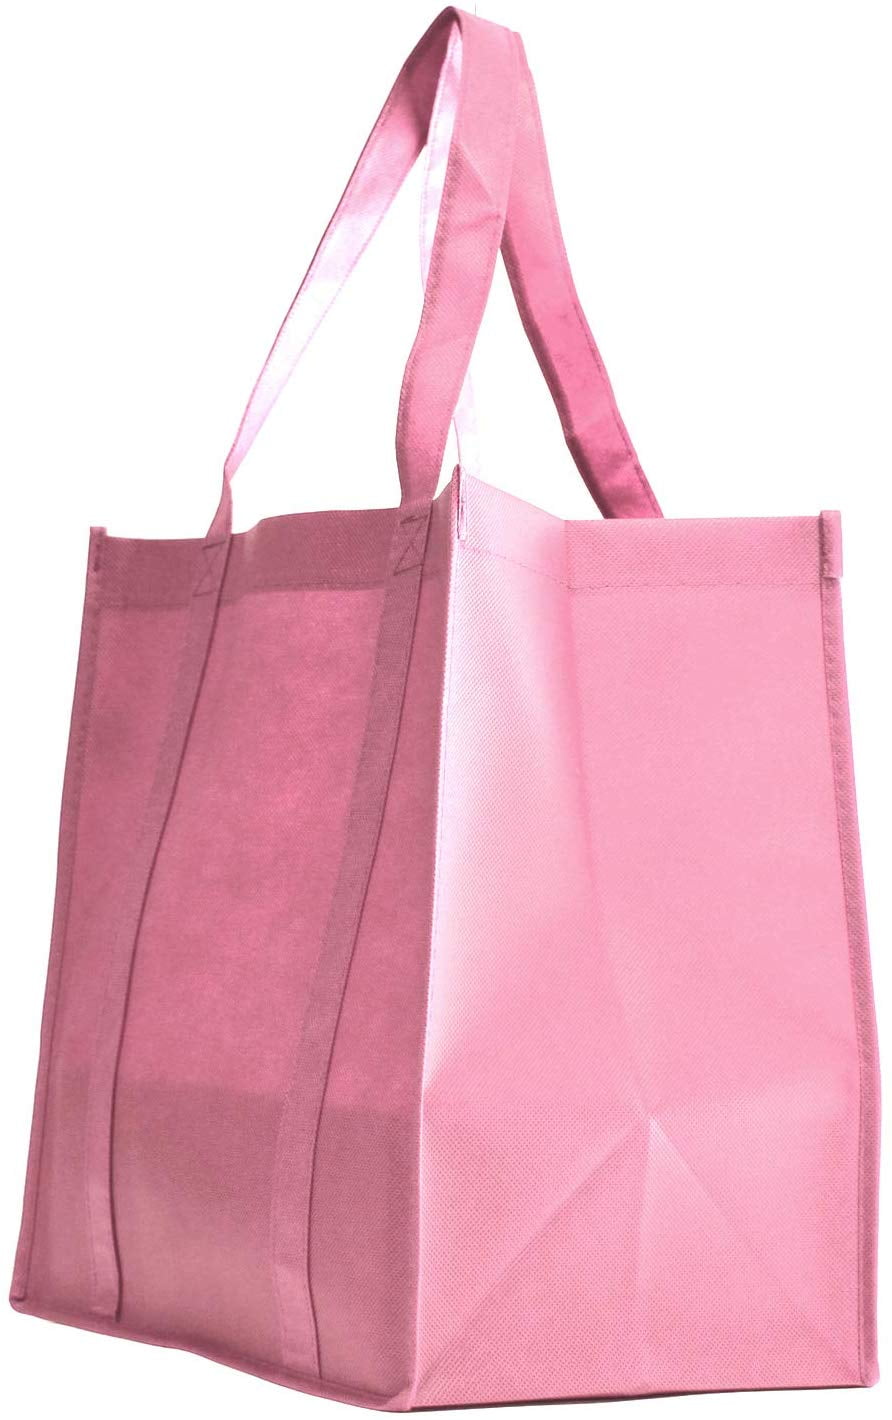 10 PACK Heavy Duty Grocery Tote Bag, Light Pink Large & Super Strong,  Reusable Shopping Bags with Stand-up PL Bottom, Non-Woven Convention Tote  Bags, (Set of 10), Light Pink 